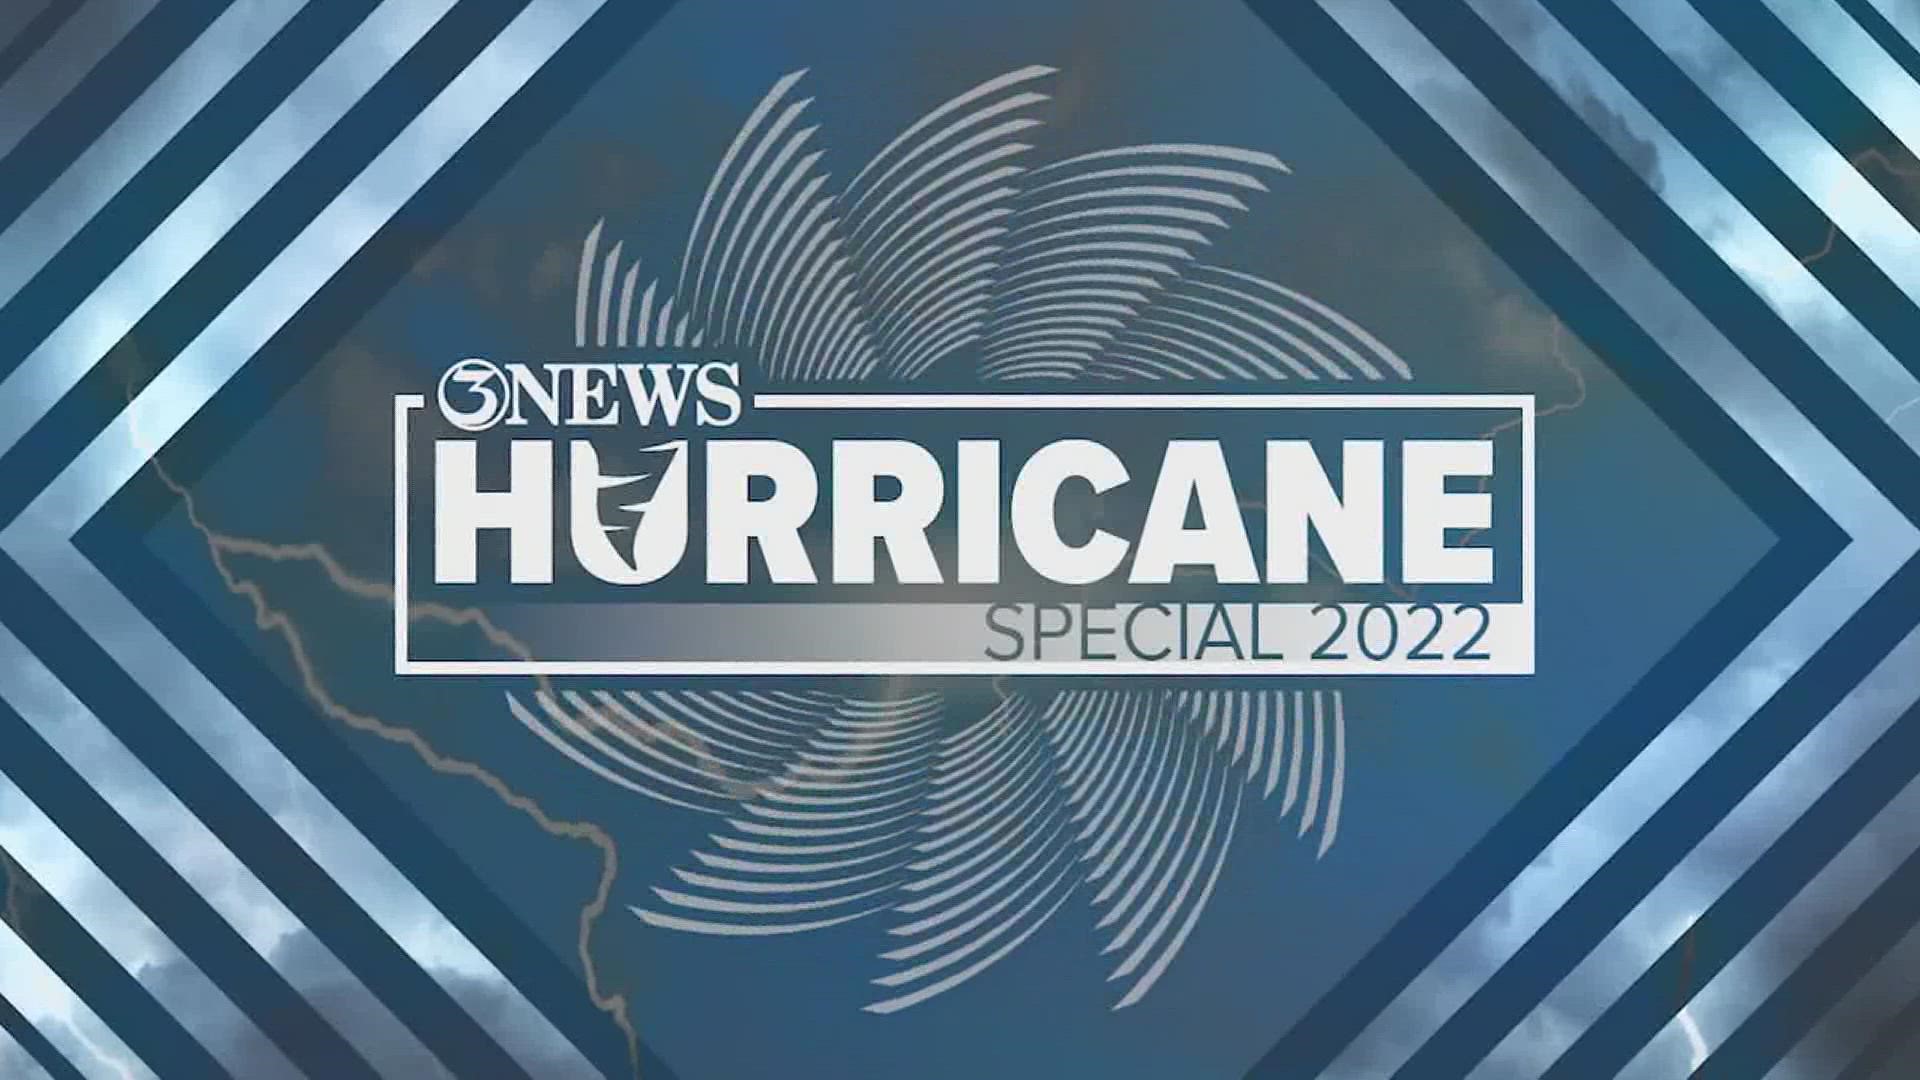 Watch the 2022 Hurricane Special in full here.